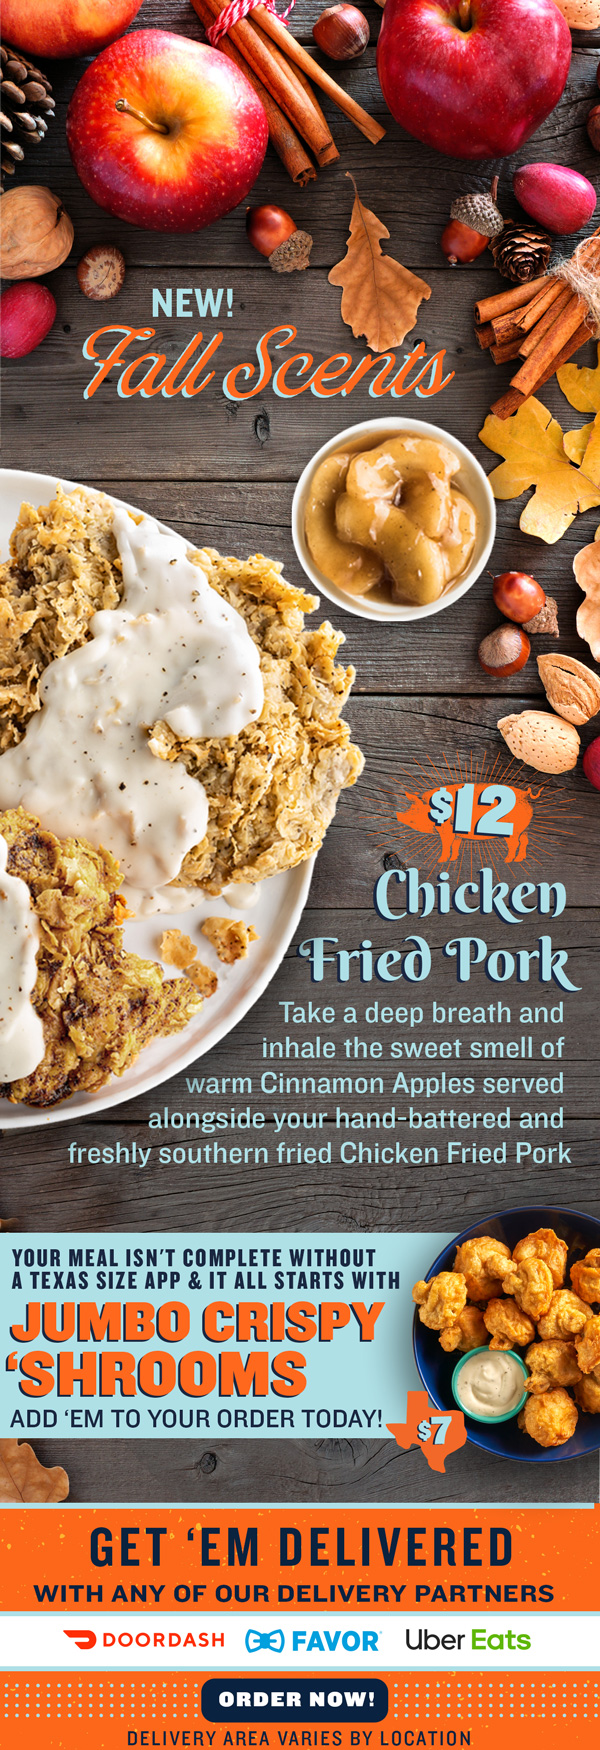 Take a deep breath and inhale the sweet smell of warm Cinnamon Apples served alongside your hand-battered and freshly southern fried Chicken Fried Pork